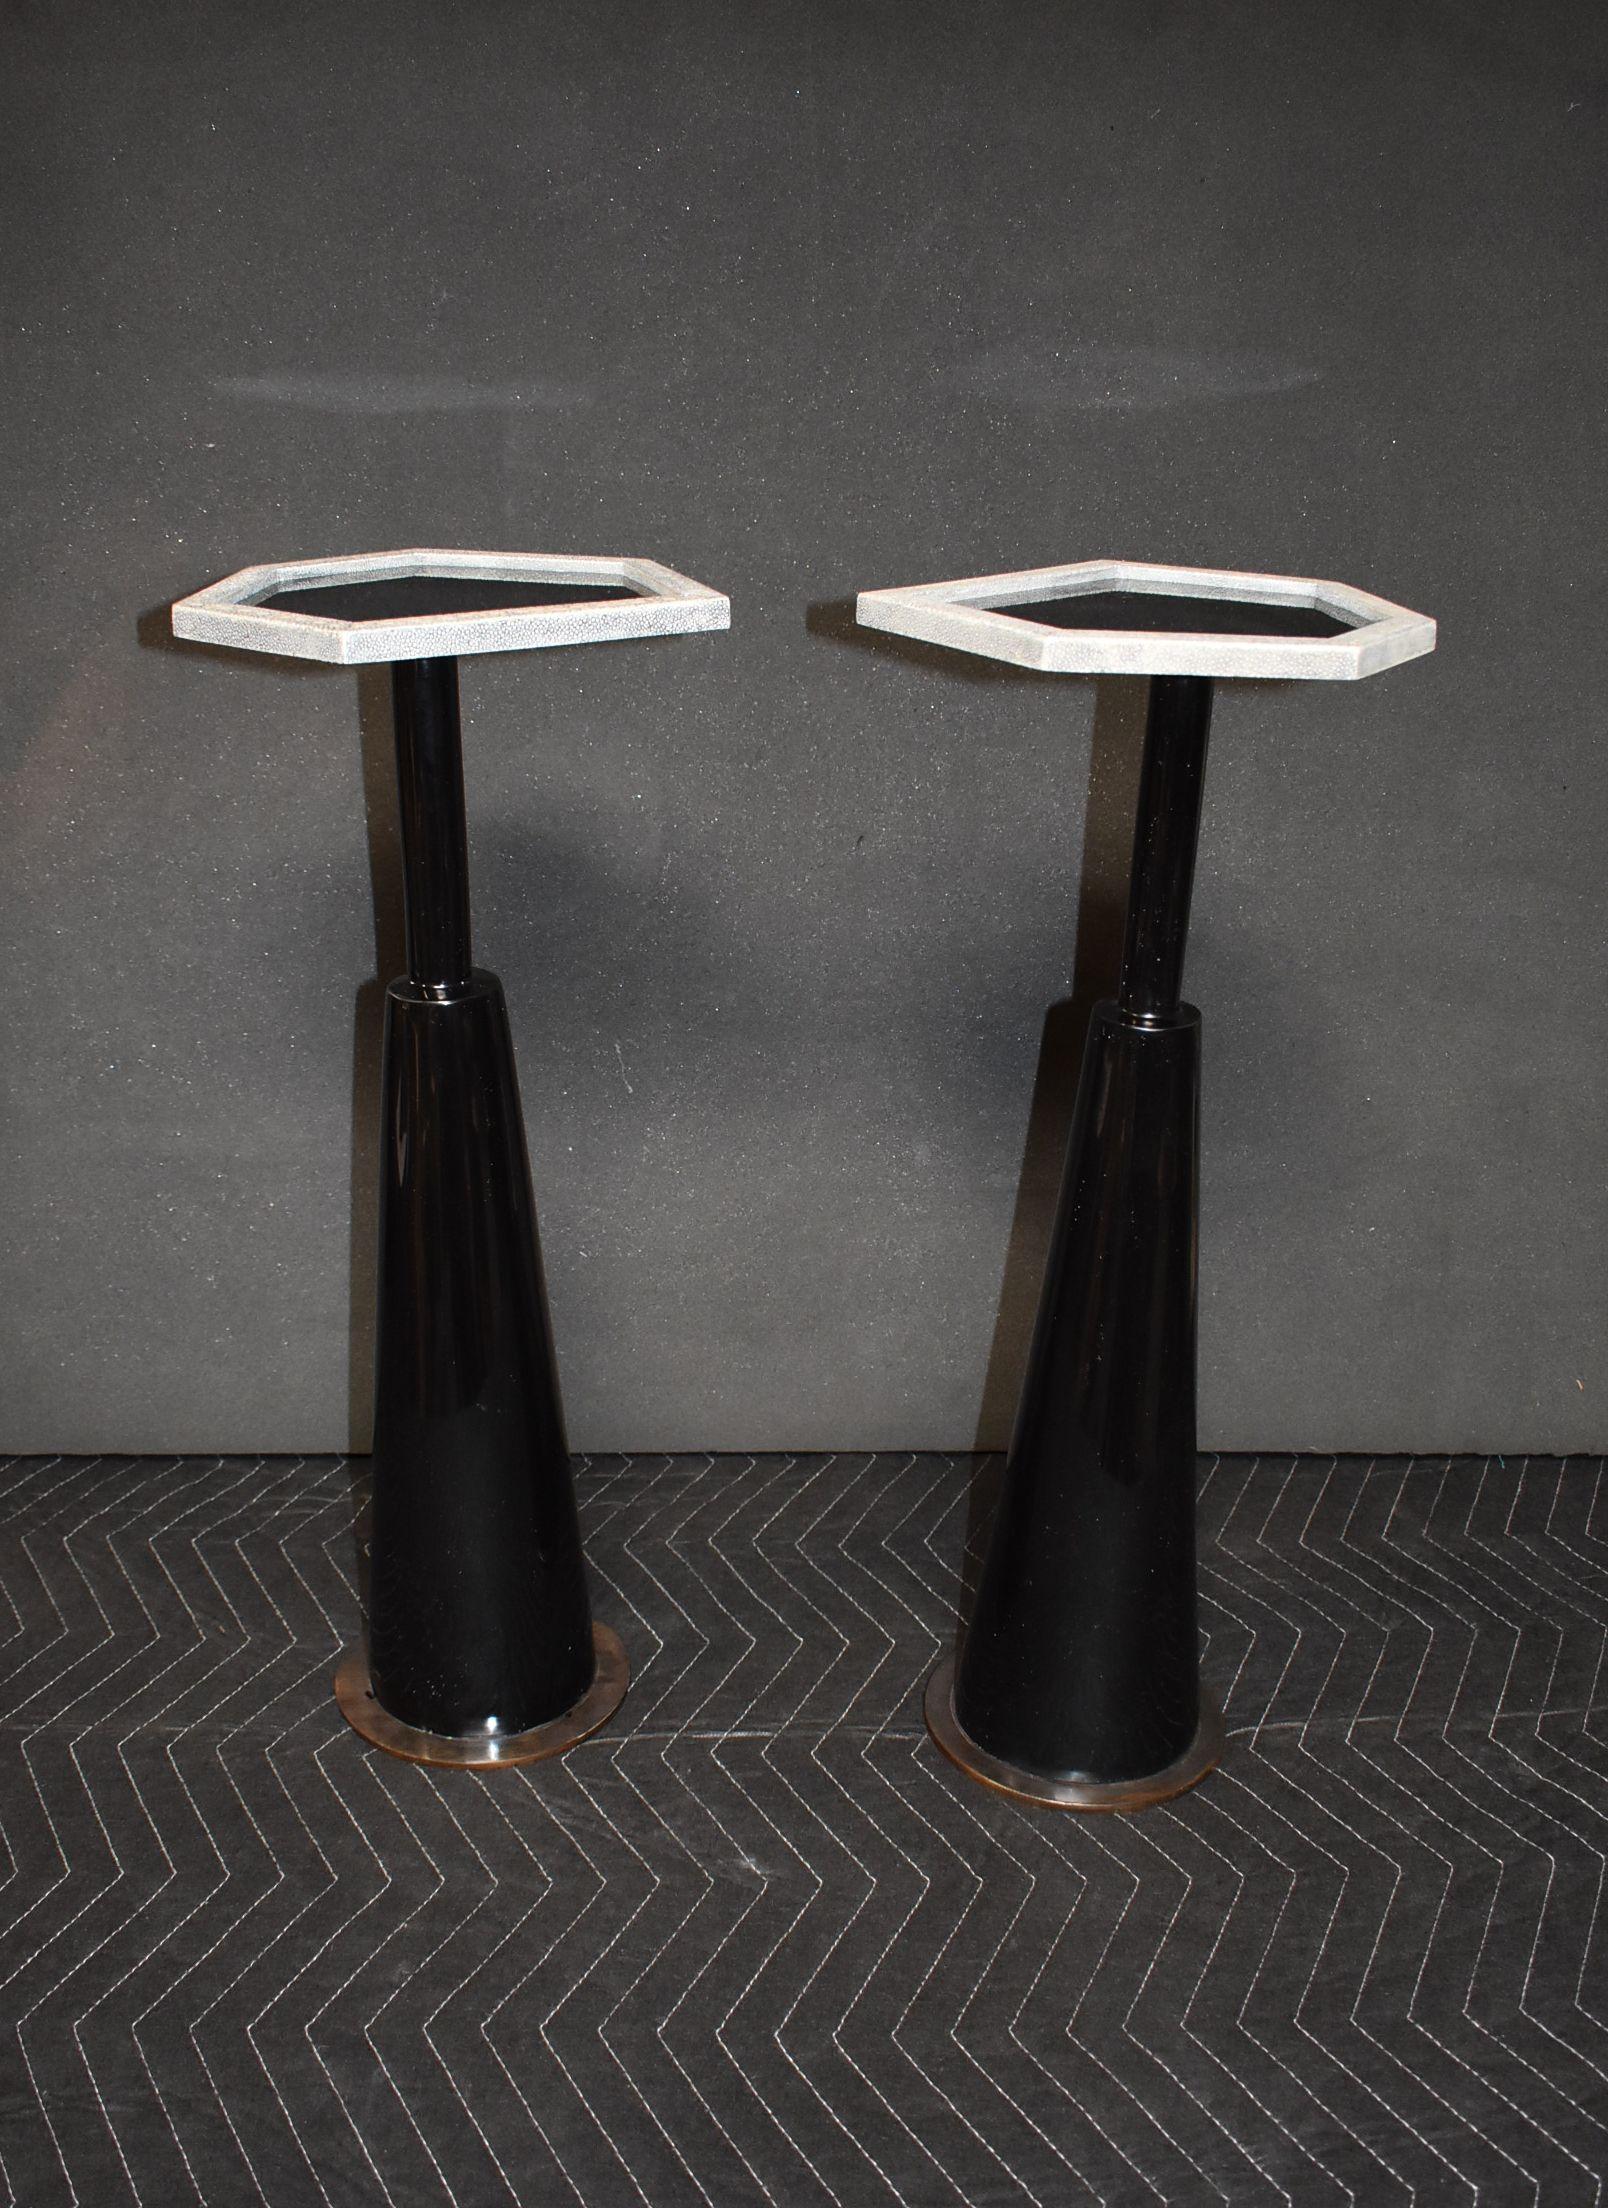 Pair of black resin side tables with trapezoid shape top and grey shagreen trim.
Round metal base with bronze patina finish.
Dimension of base: Diameter 6.5